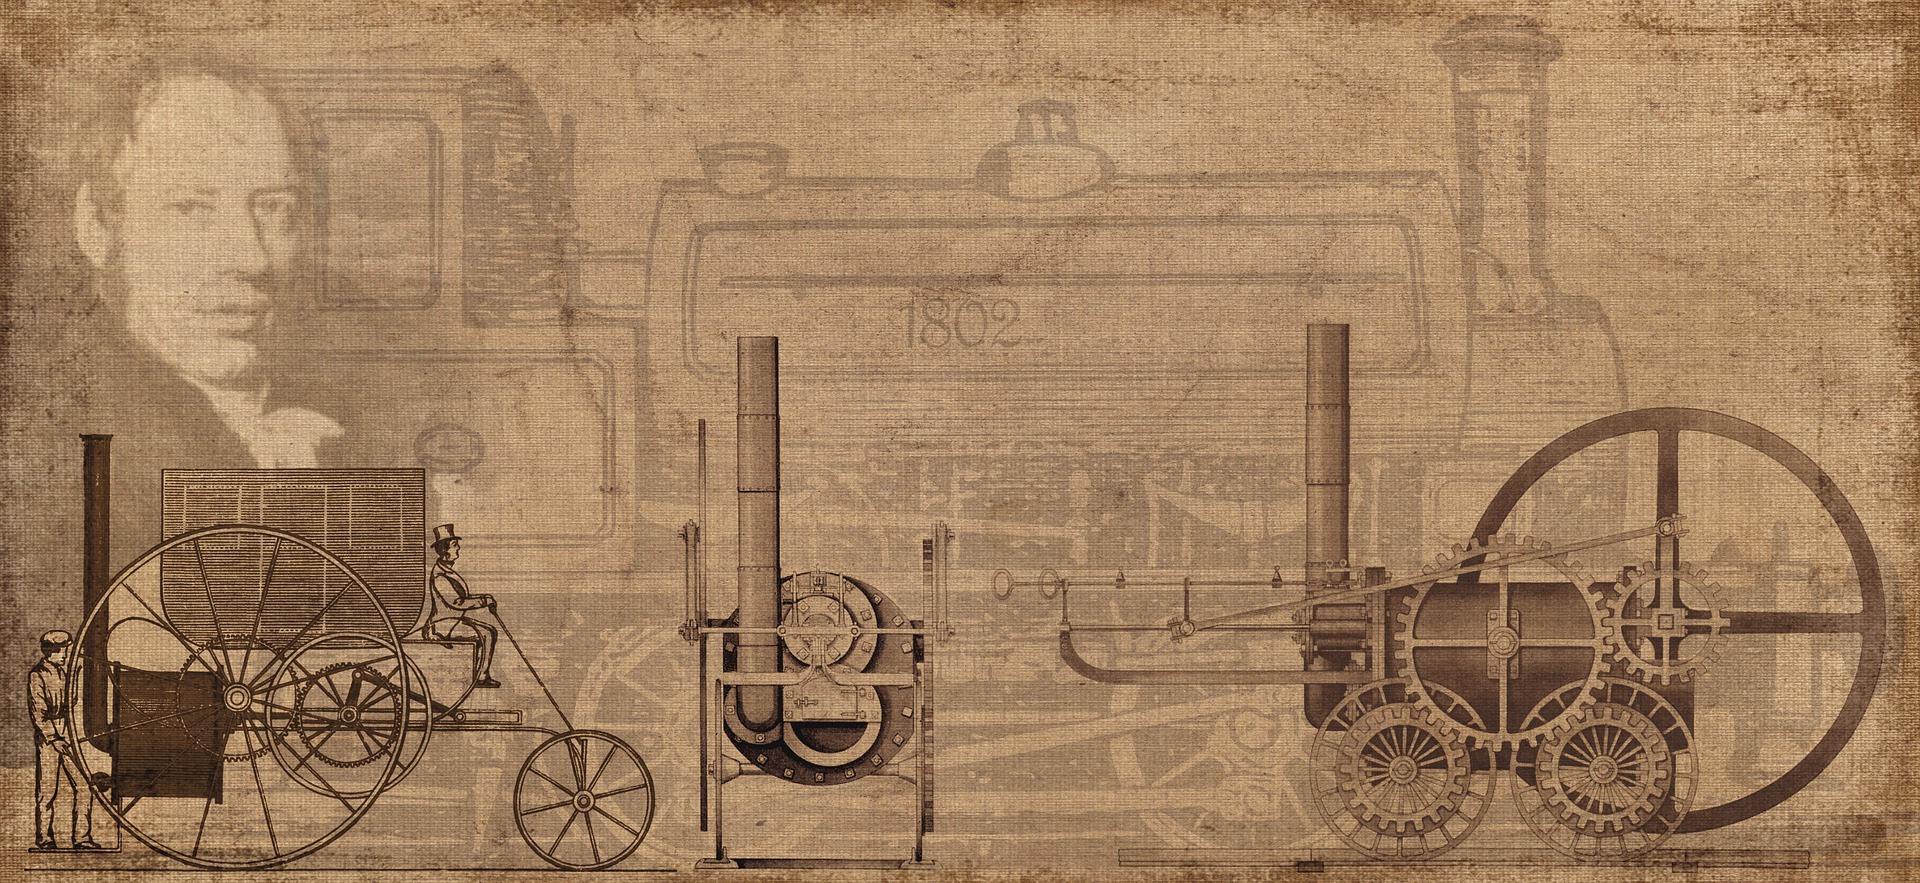 Steam Locomotive - an old-fashioned image of a steam locomotive